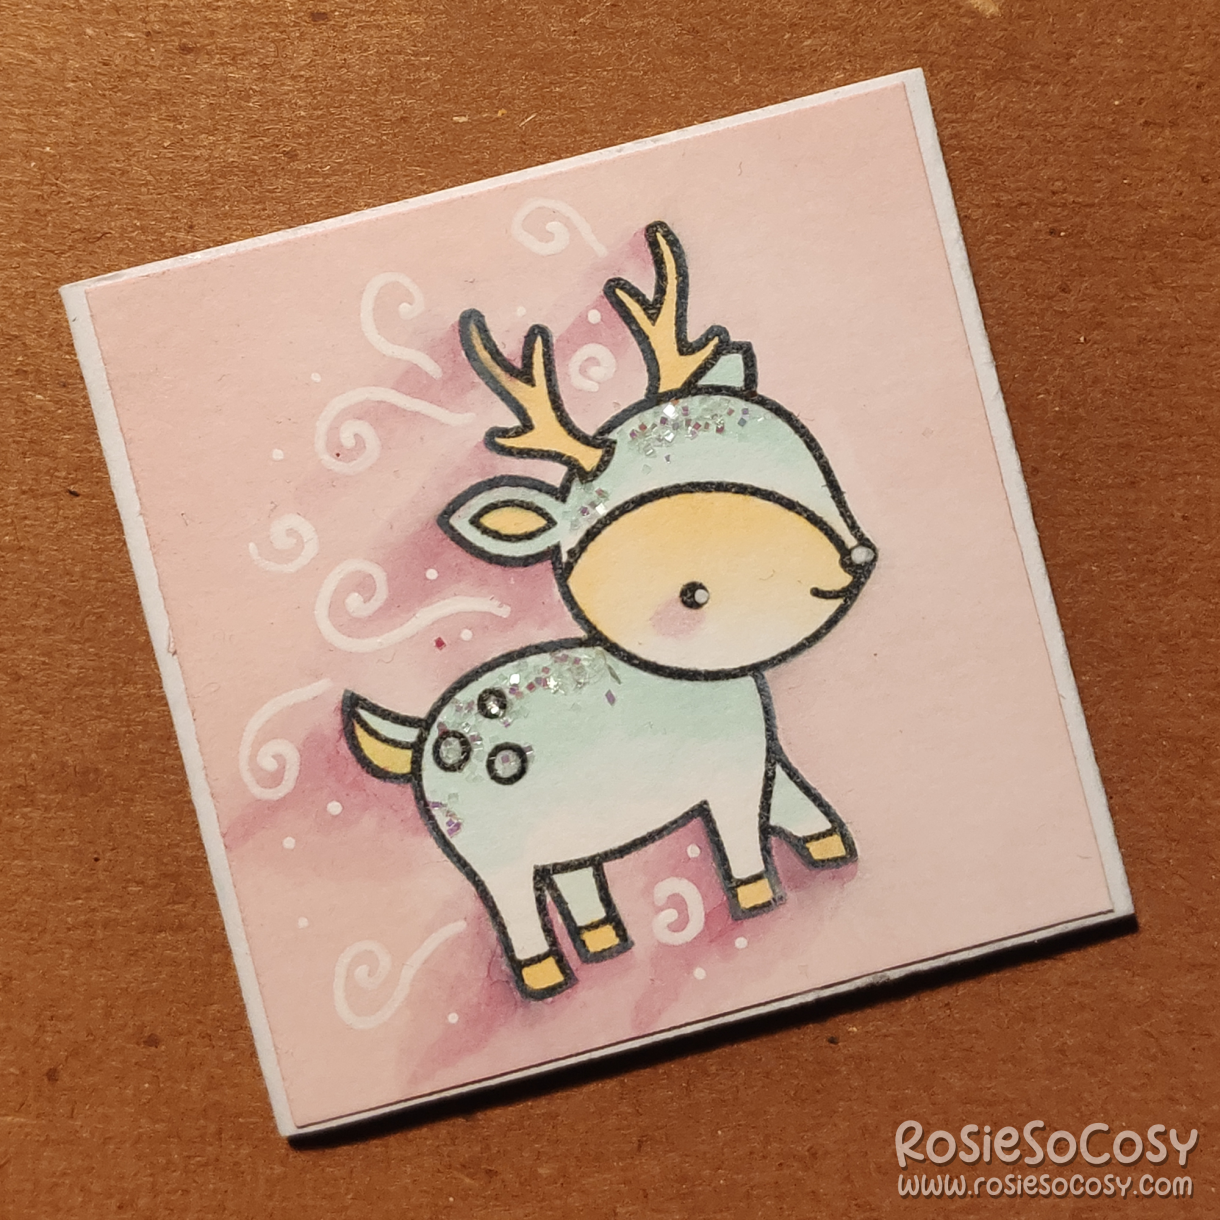 An inch sized card with a light pink background, and a light blue deer which seems to be rushing or running towards (or from) something.